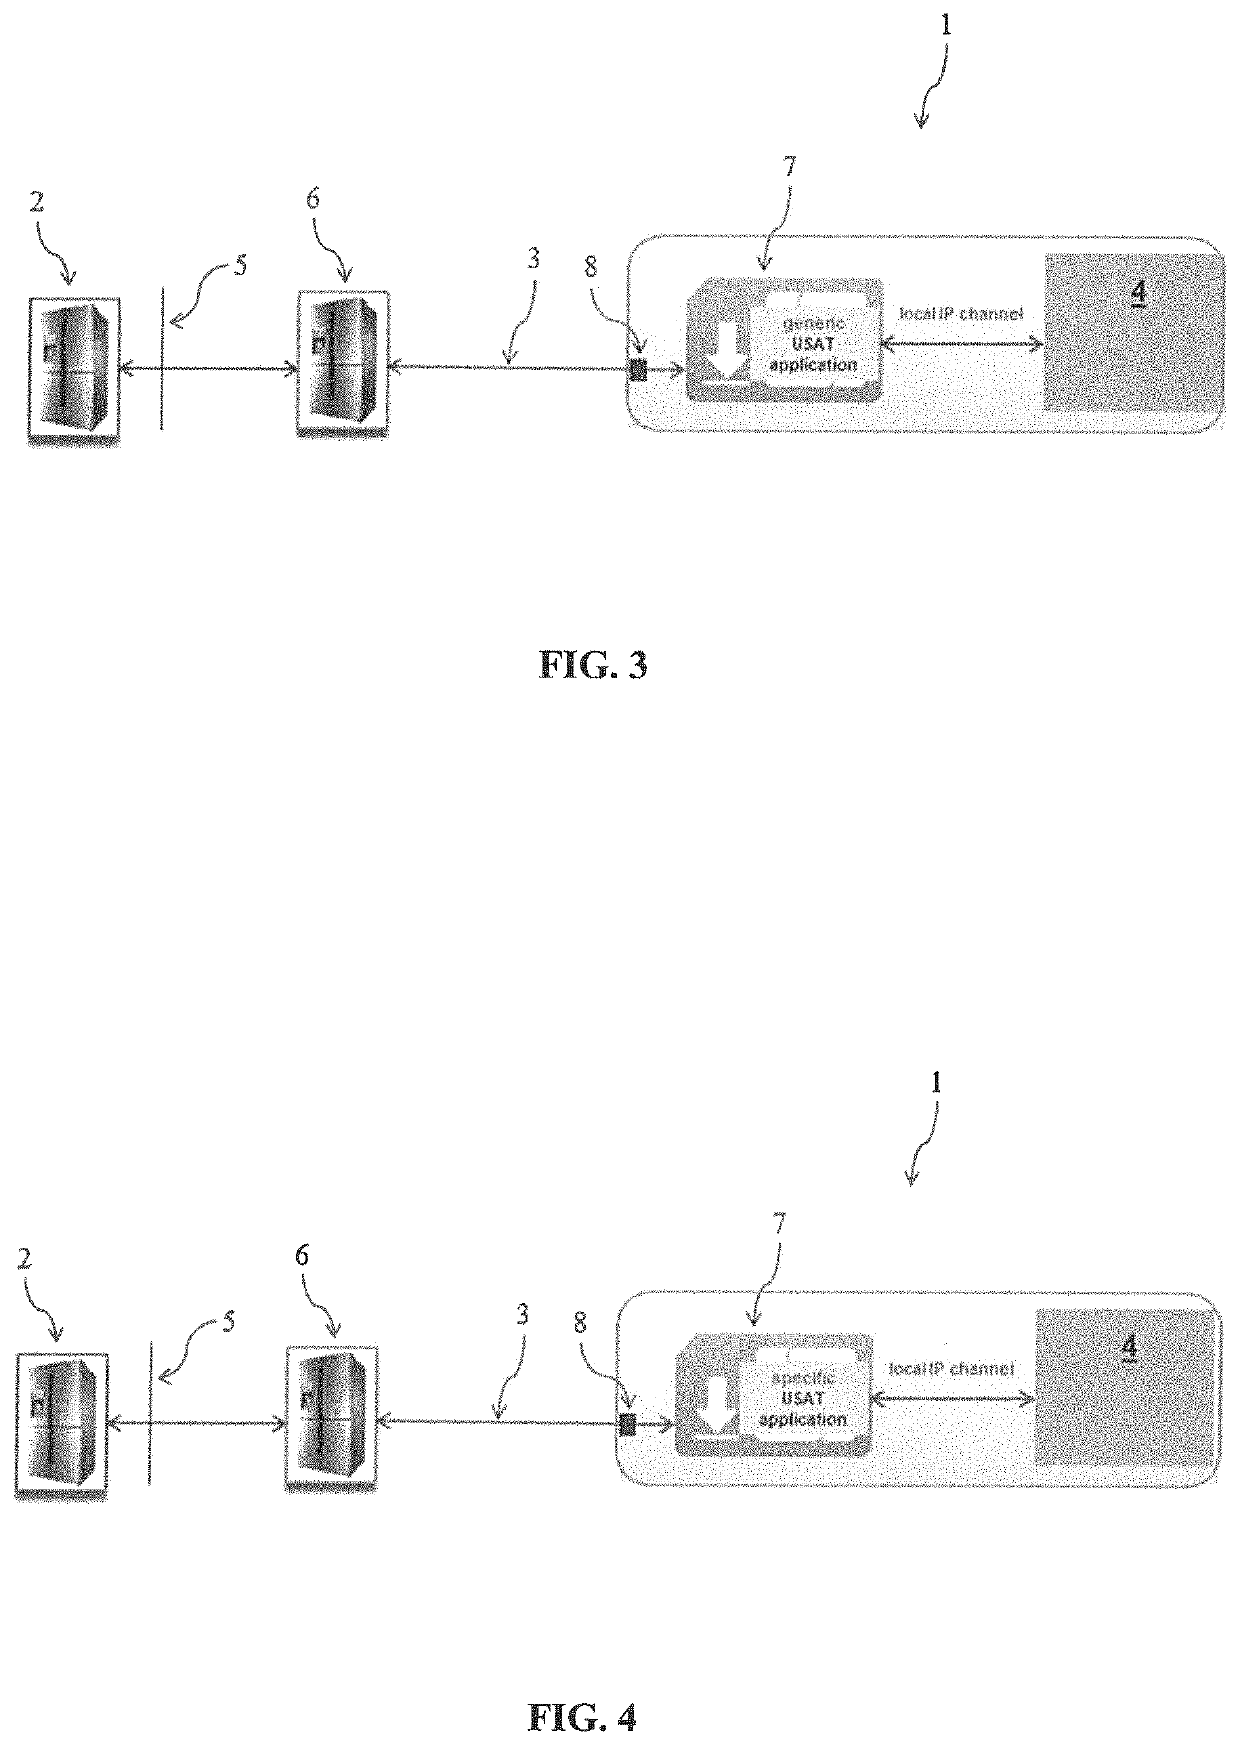 System for securing exchanges between a communicating thing and a services platform